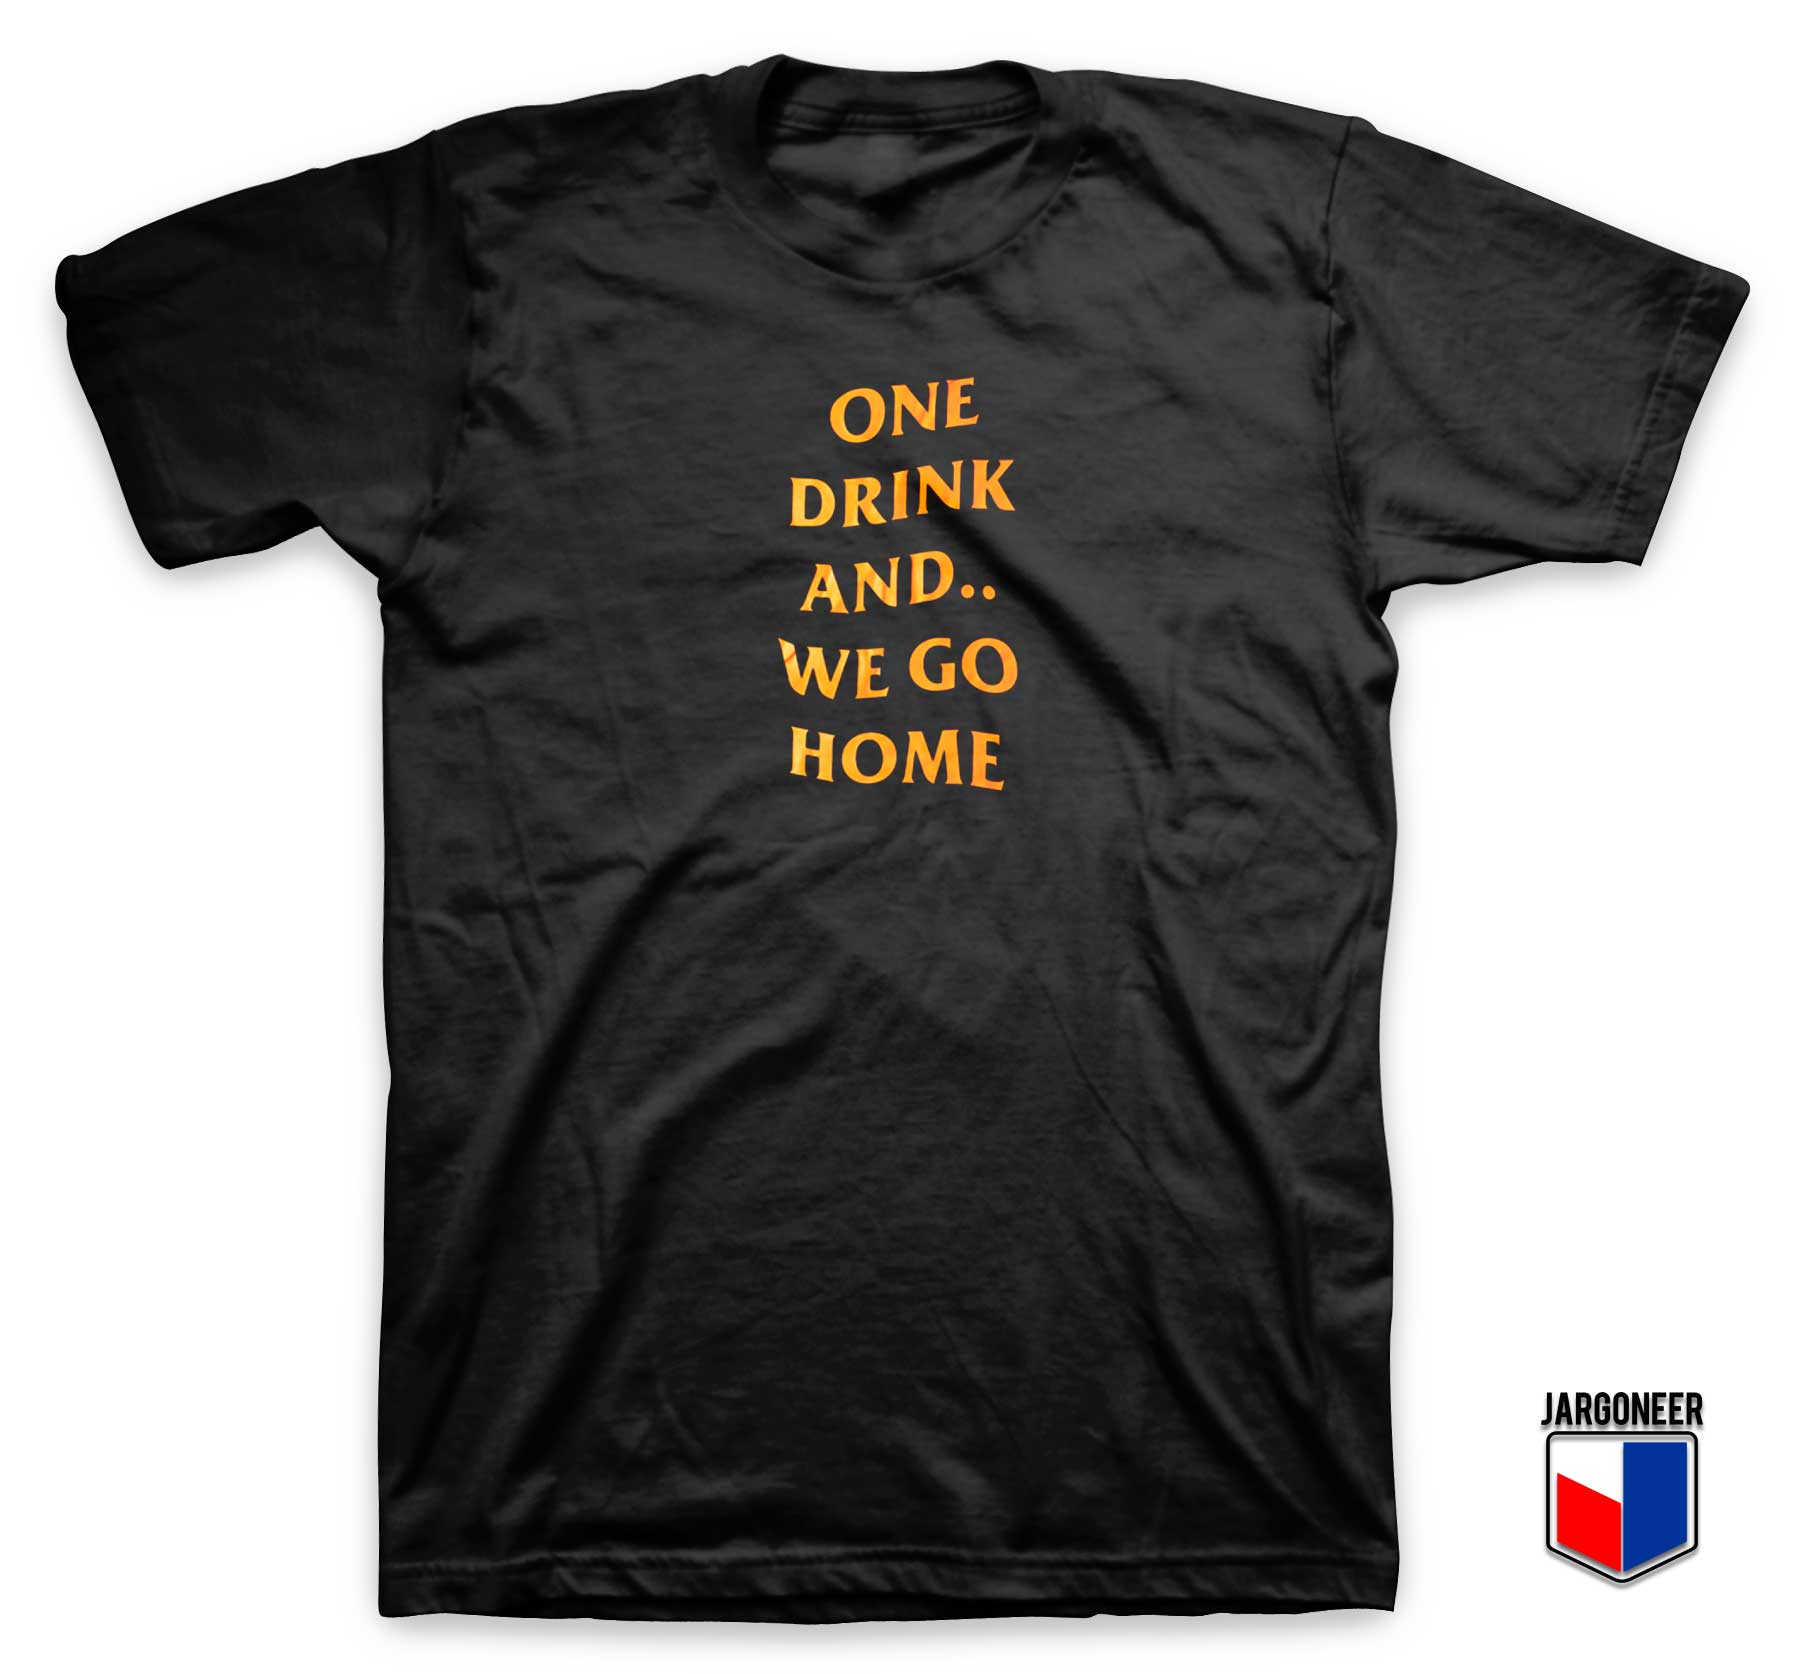 One Drink And We Go Home T shirt - Design By jargoneer.com